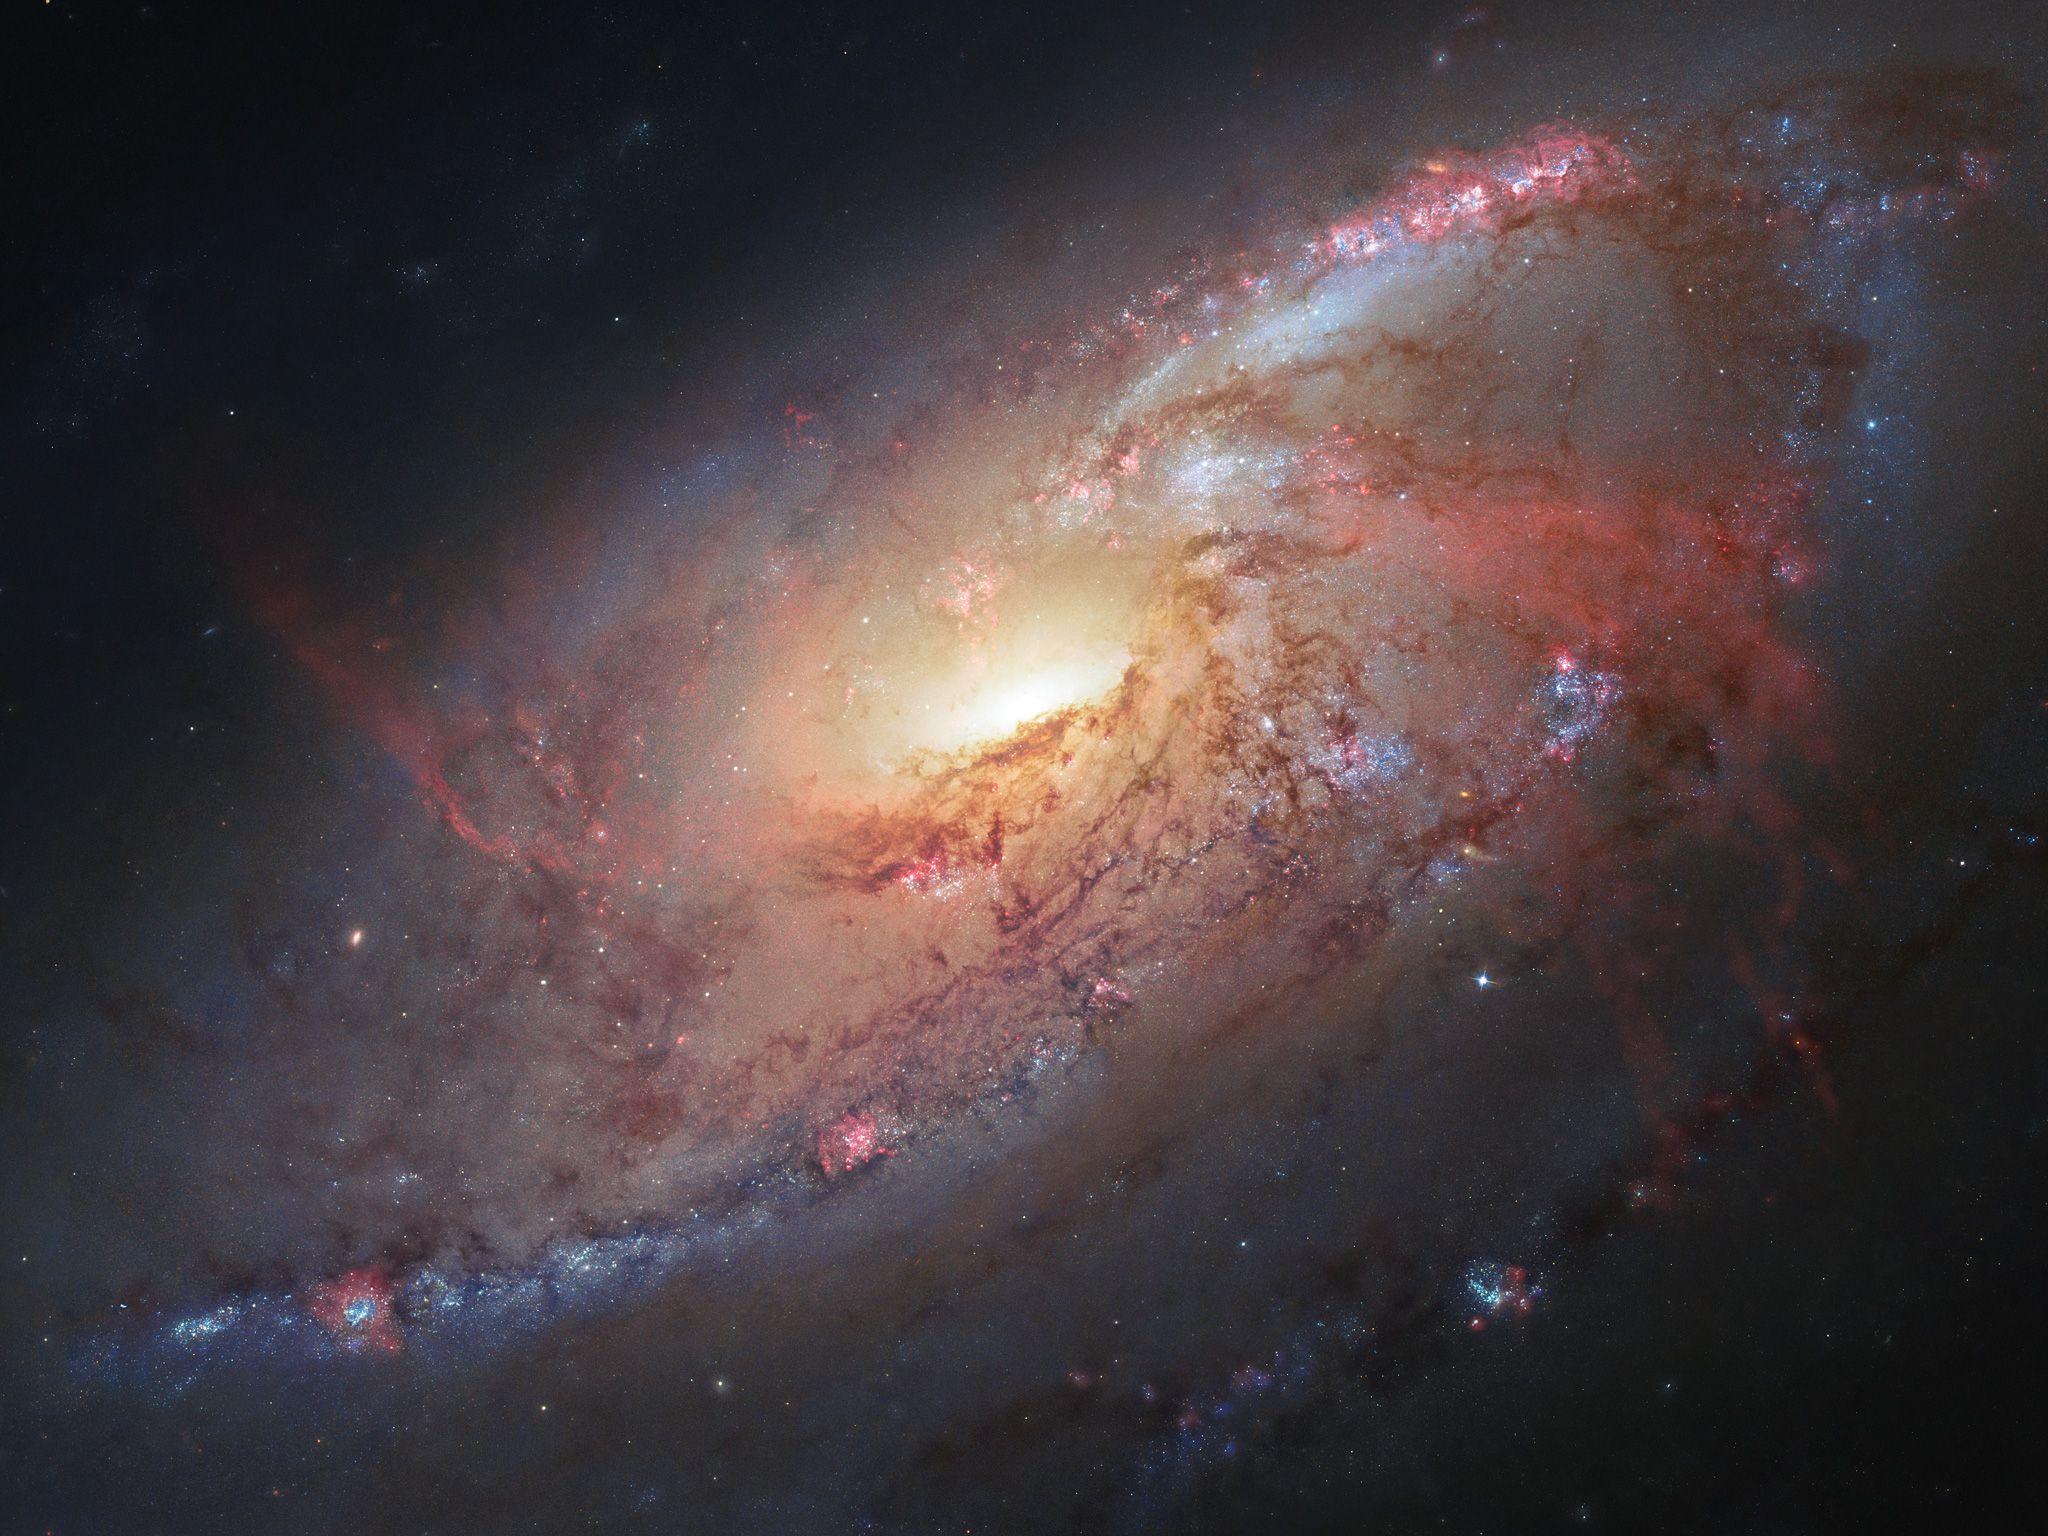 Wallpaper, NASA, Milky Way, nebula, atmosphere, spiral galaxy, astronomy, Hubble, ESA, european, outer space, astronomical object, agency, europeanspaceagency, m106 2048x1536